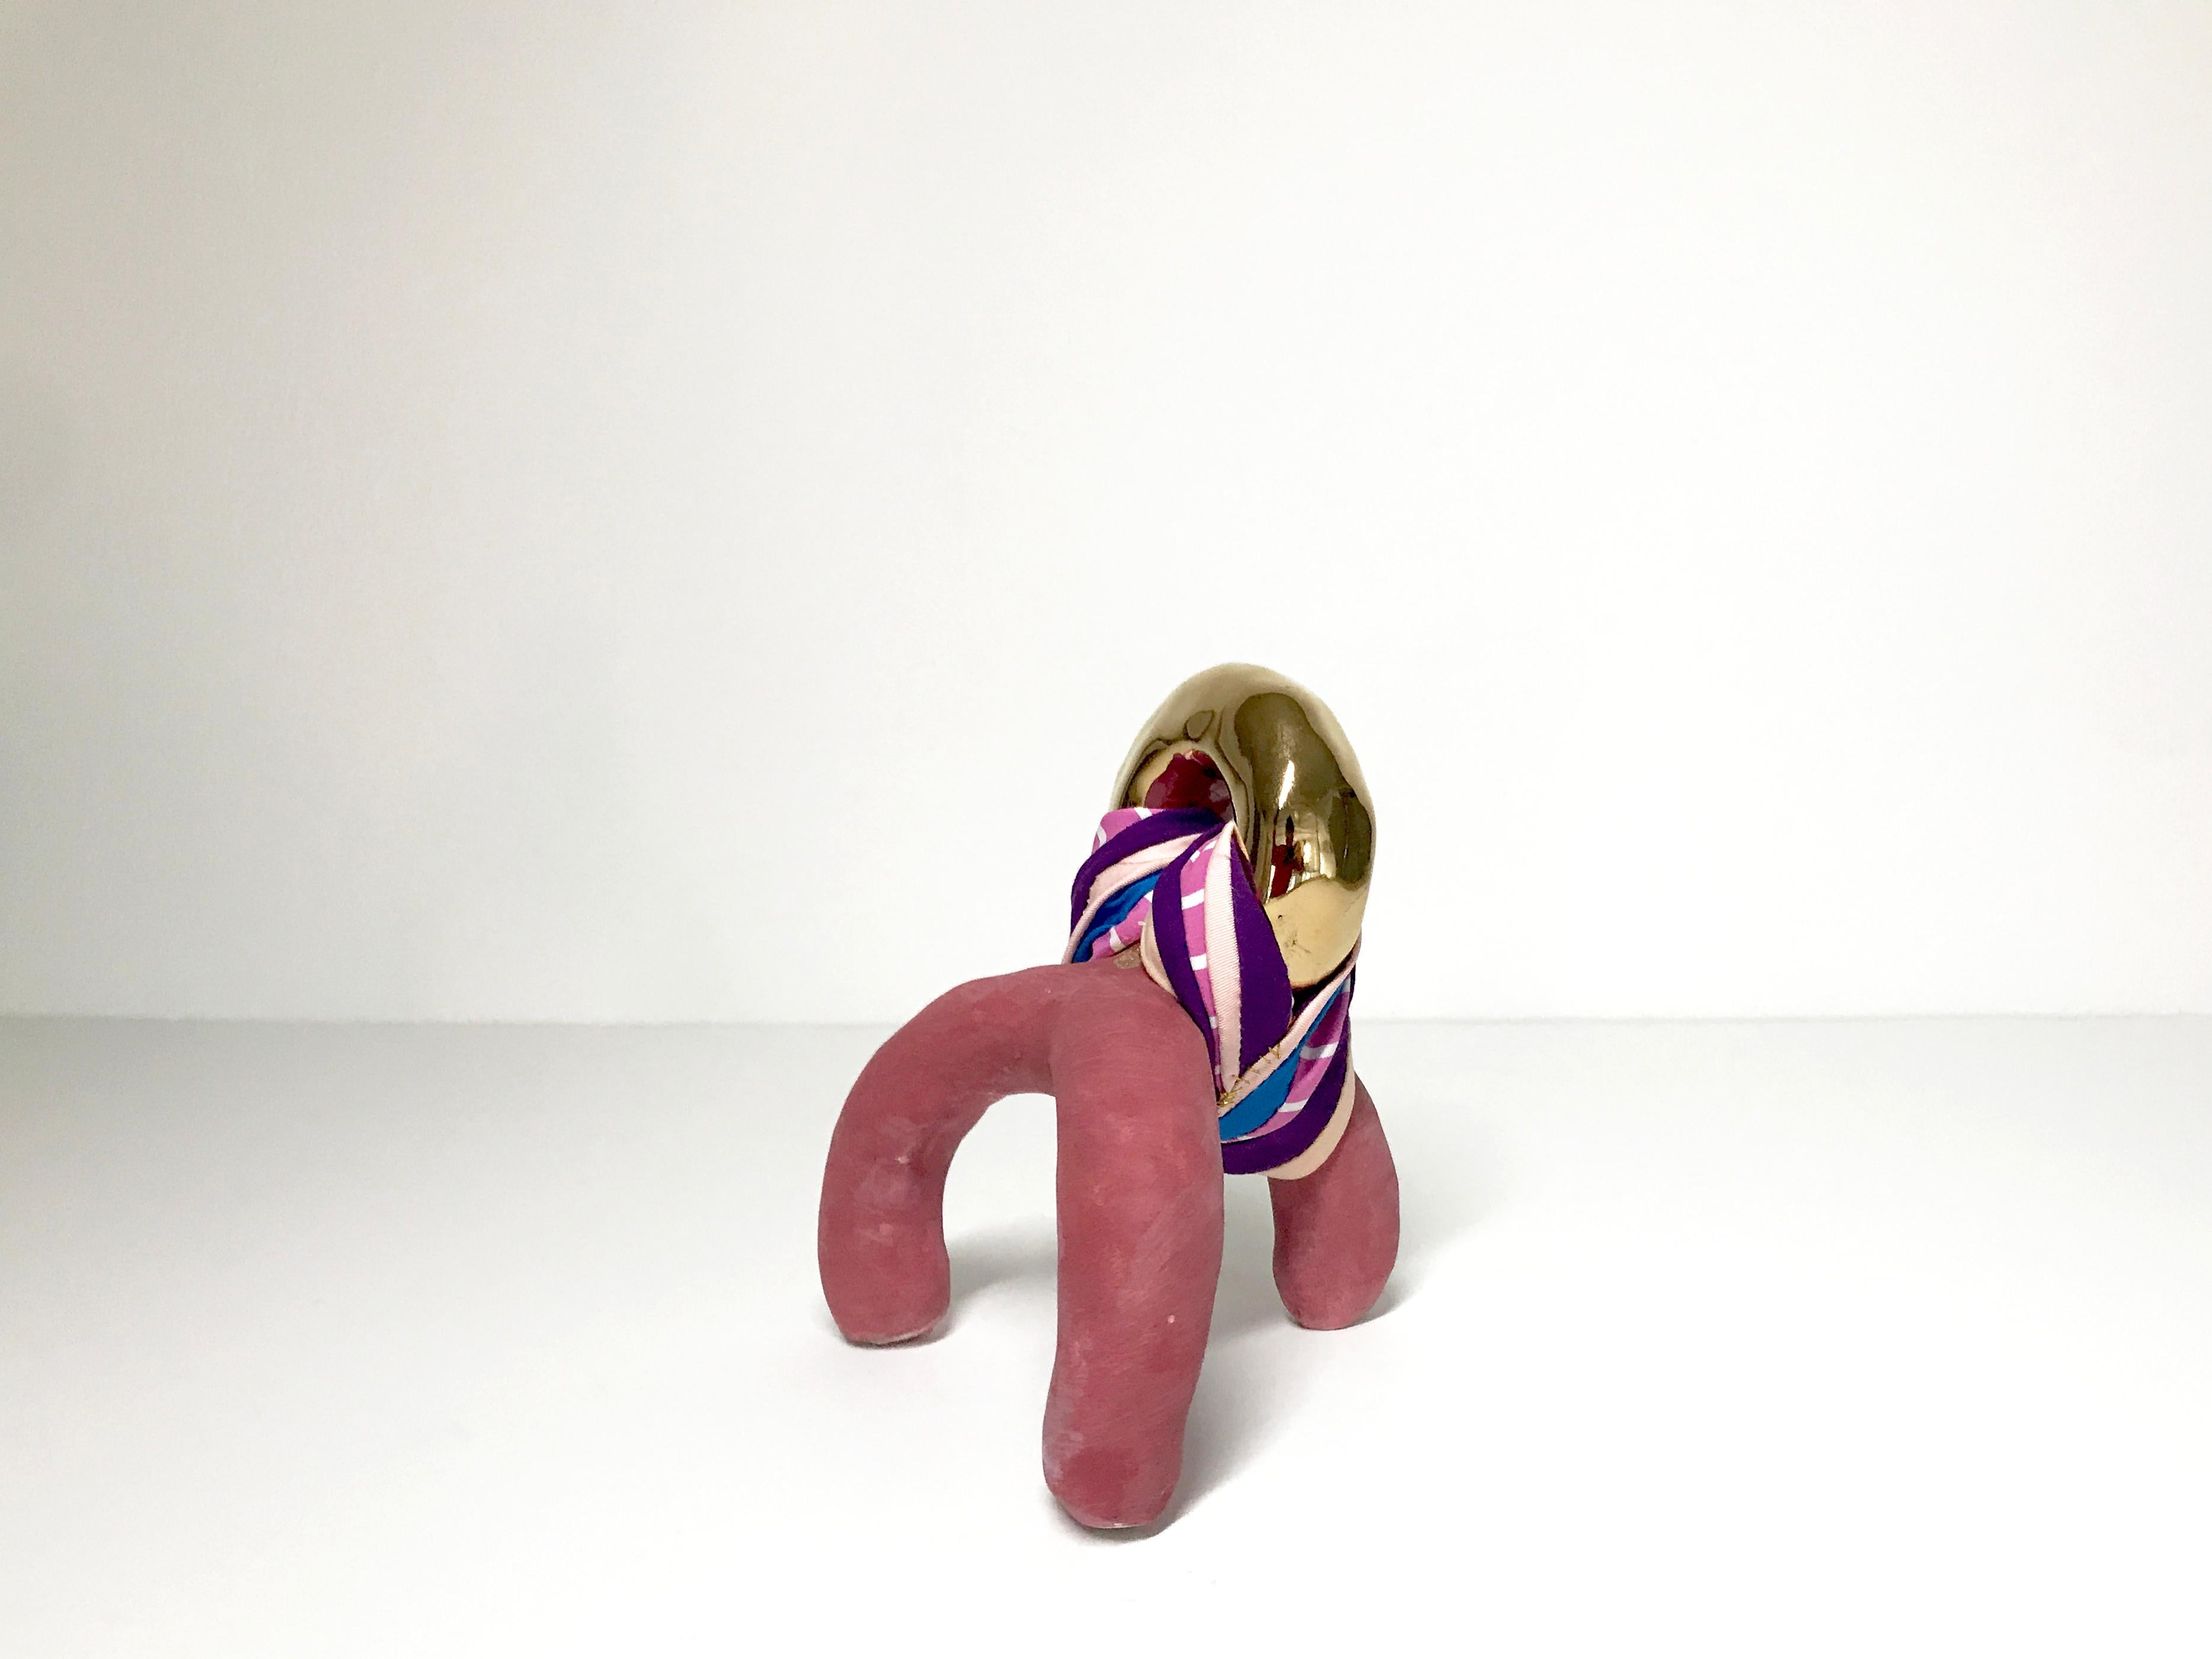 Ceramic and textile small sculpture: 'No. 17' - Mixed Media Art by Ak Jansen